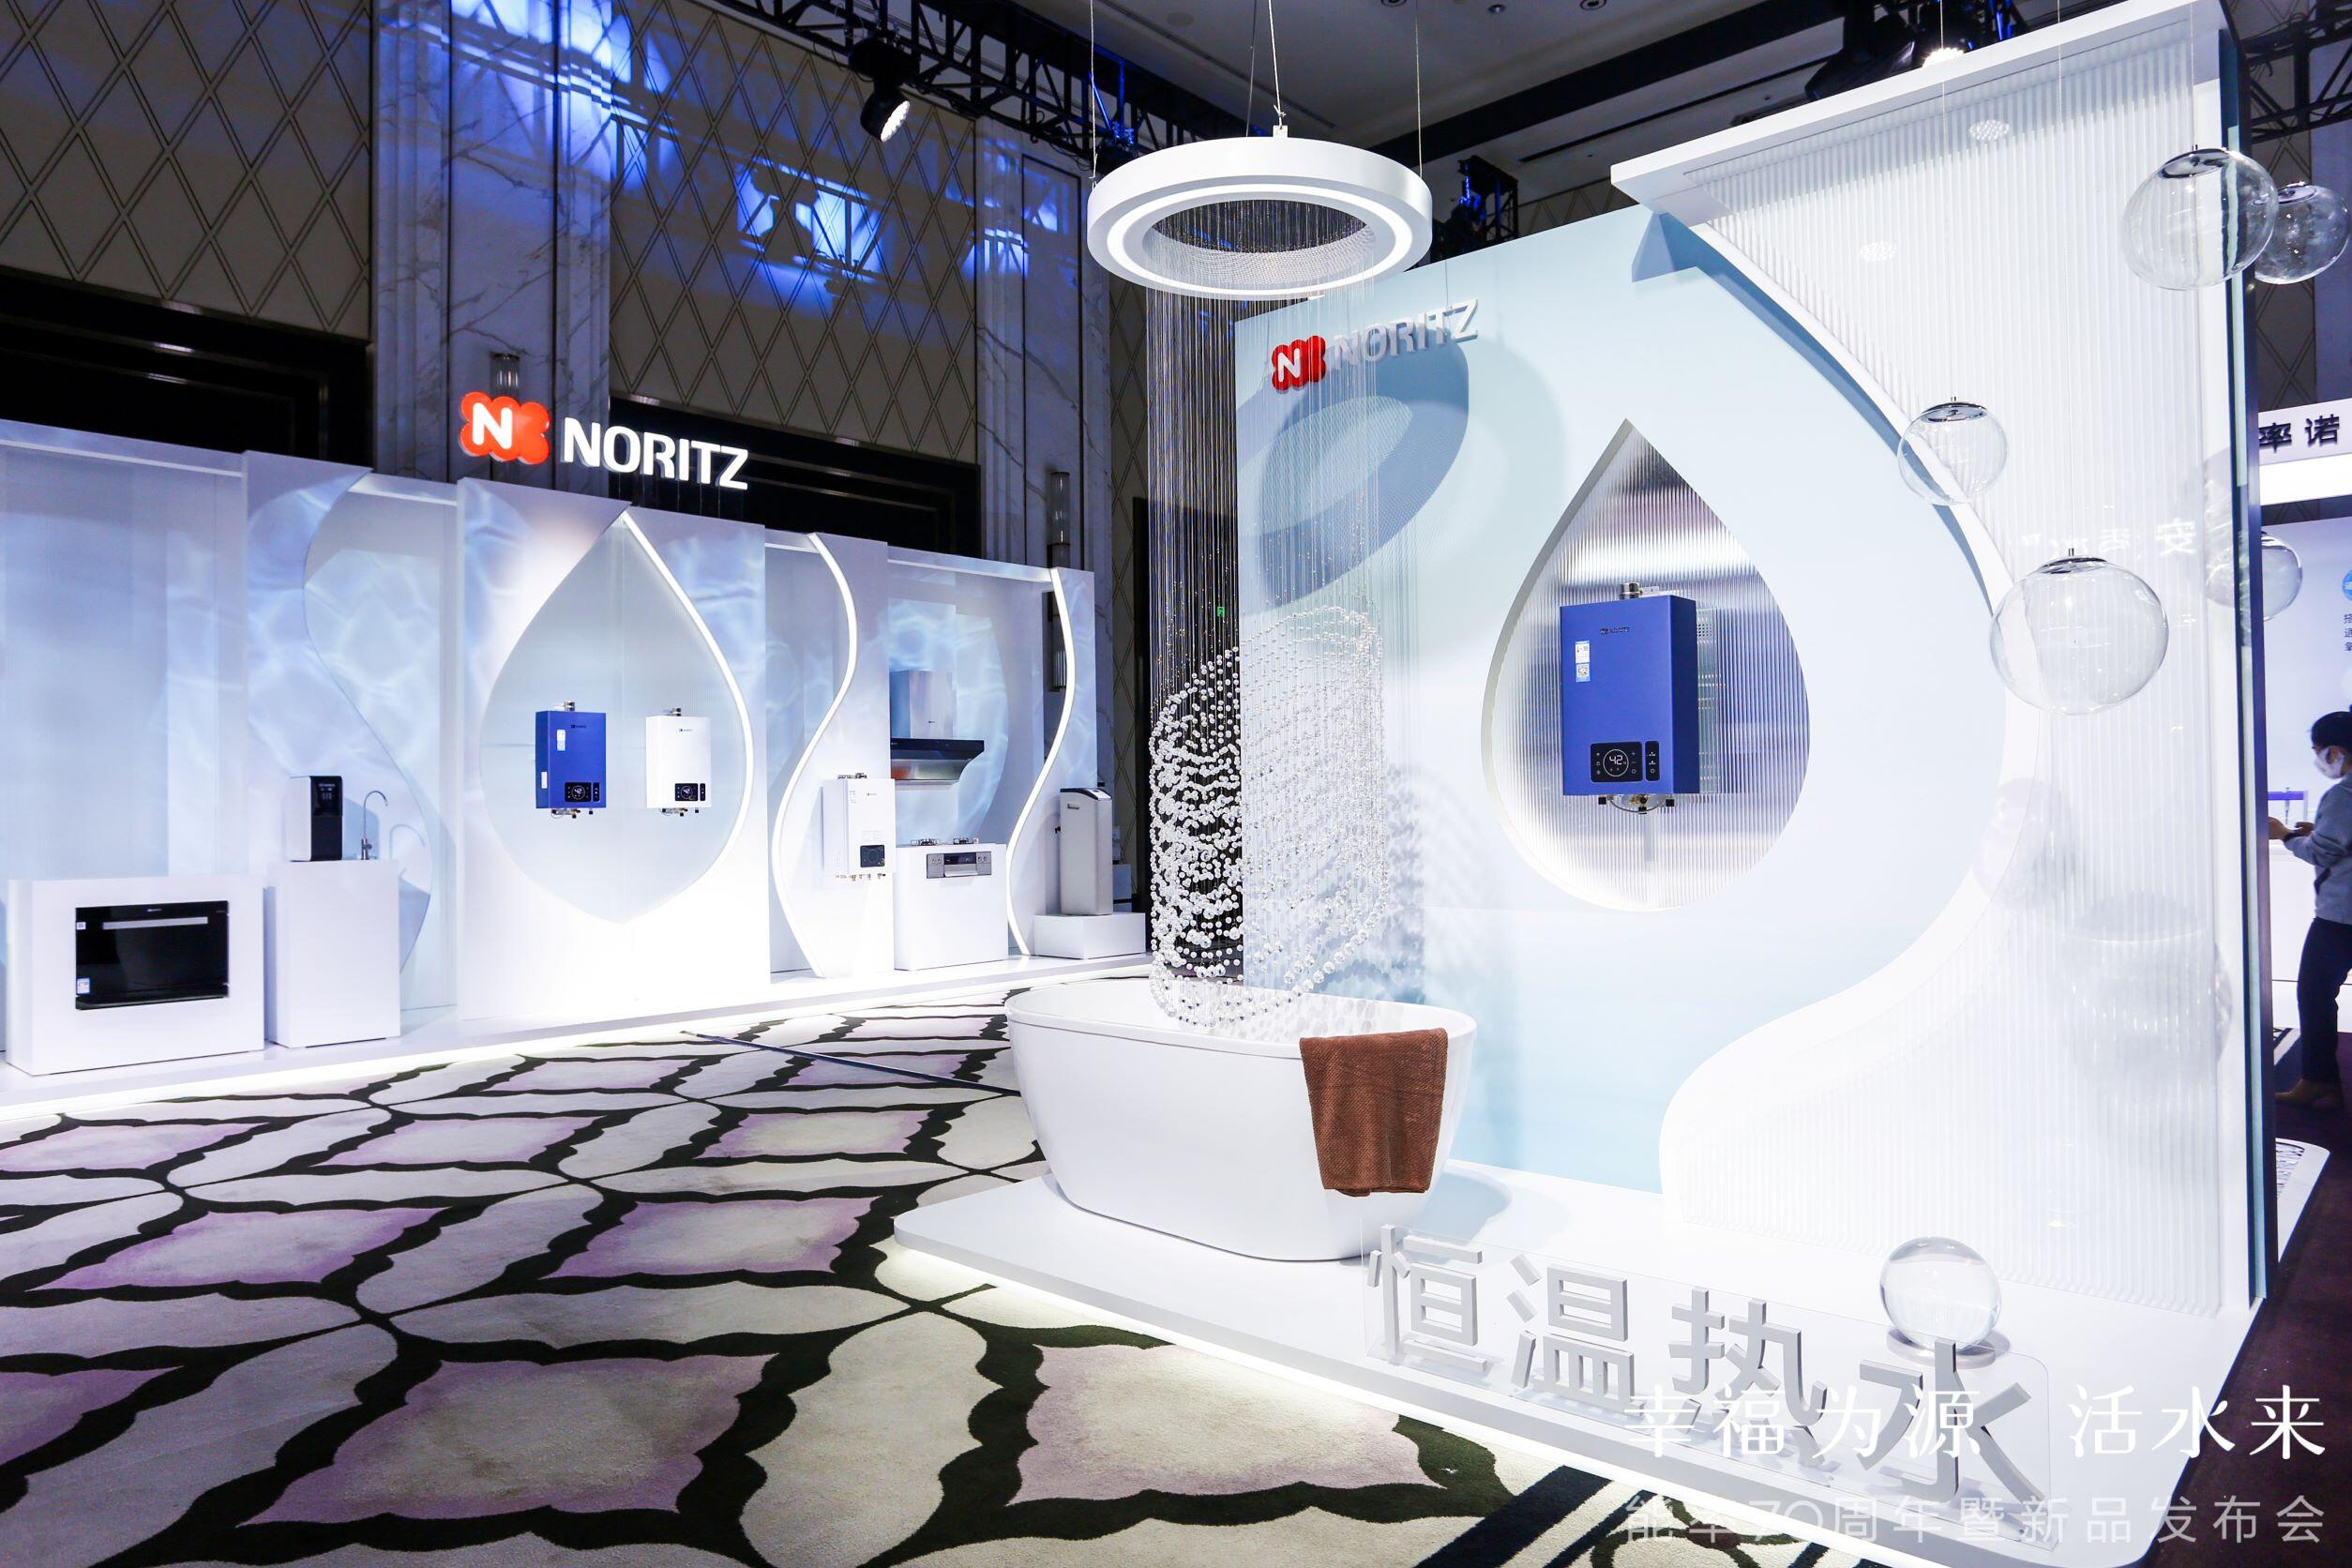 Noritz China's products equipped with O₃ water.